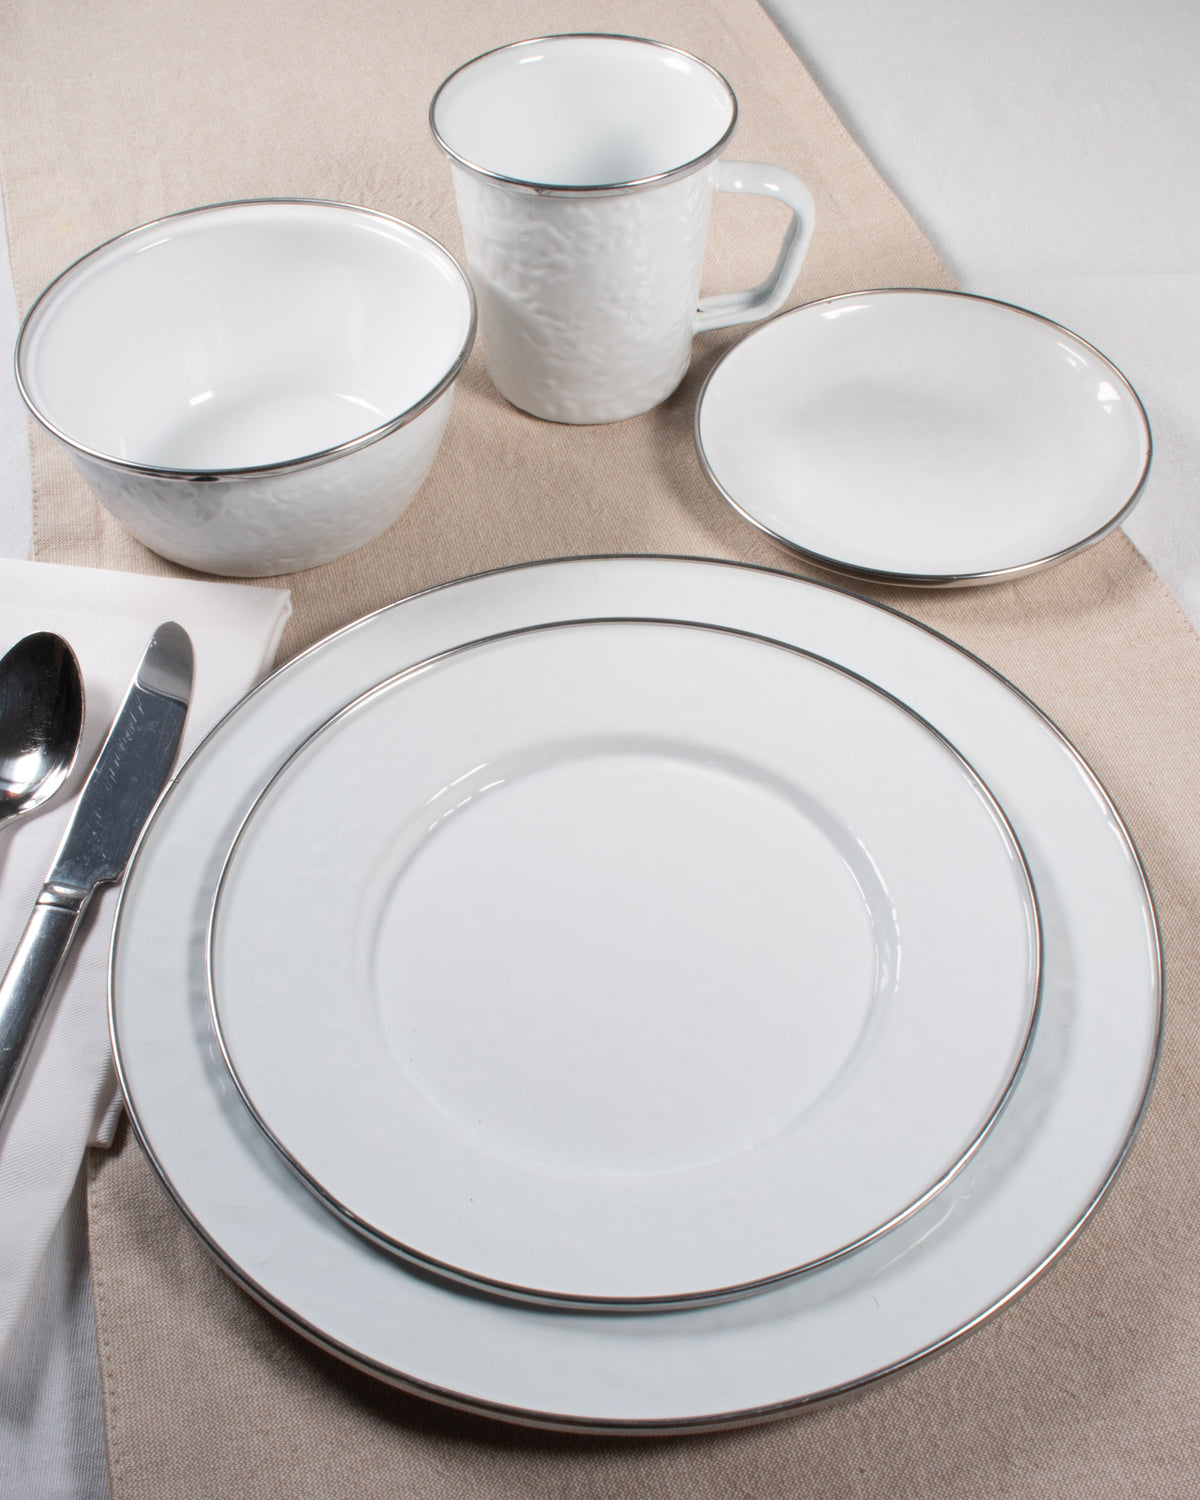 Dinner Plates in Solid White, Set of 4